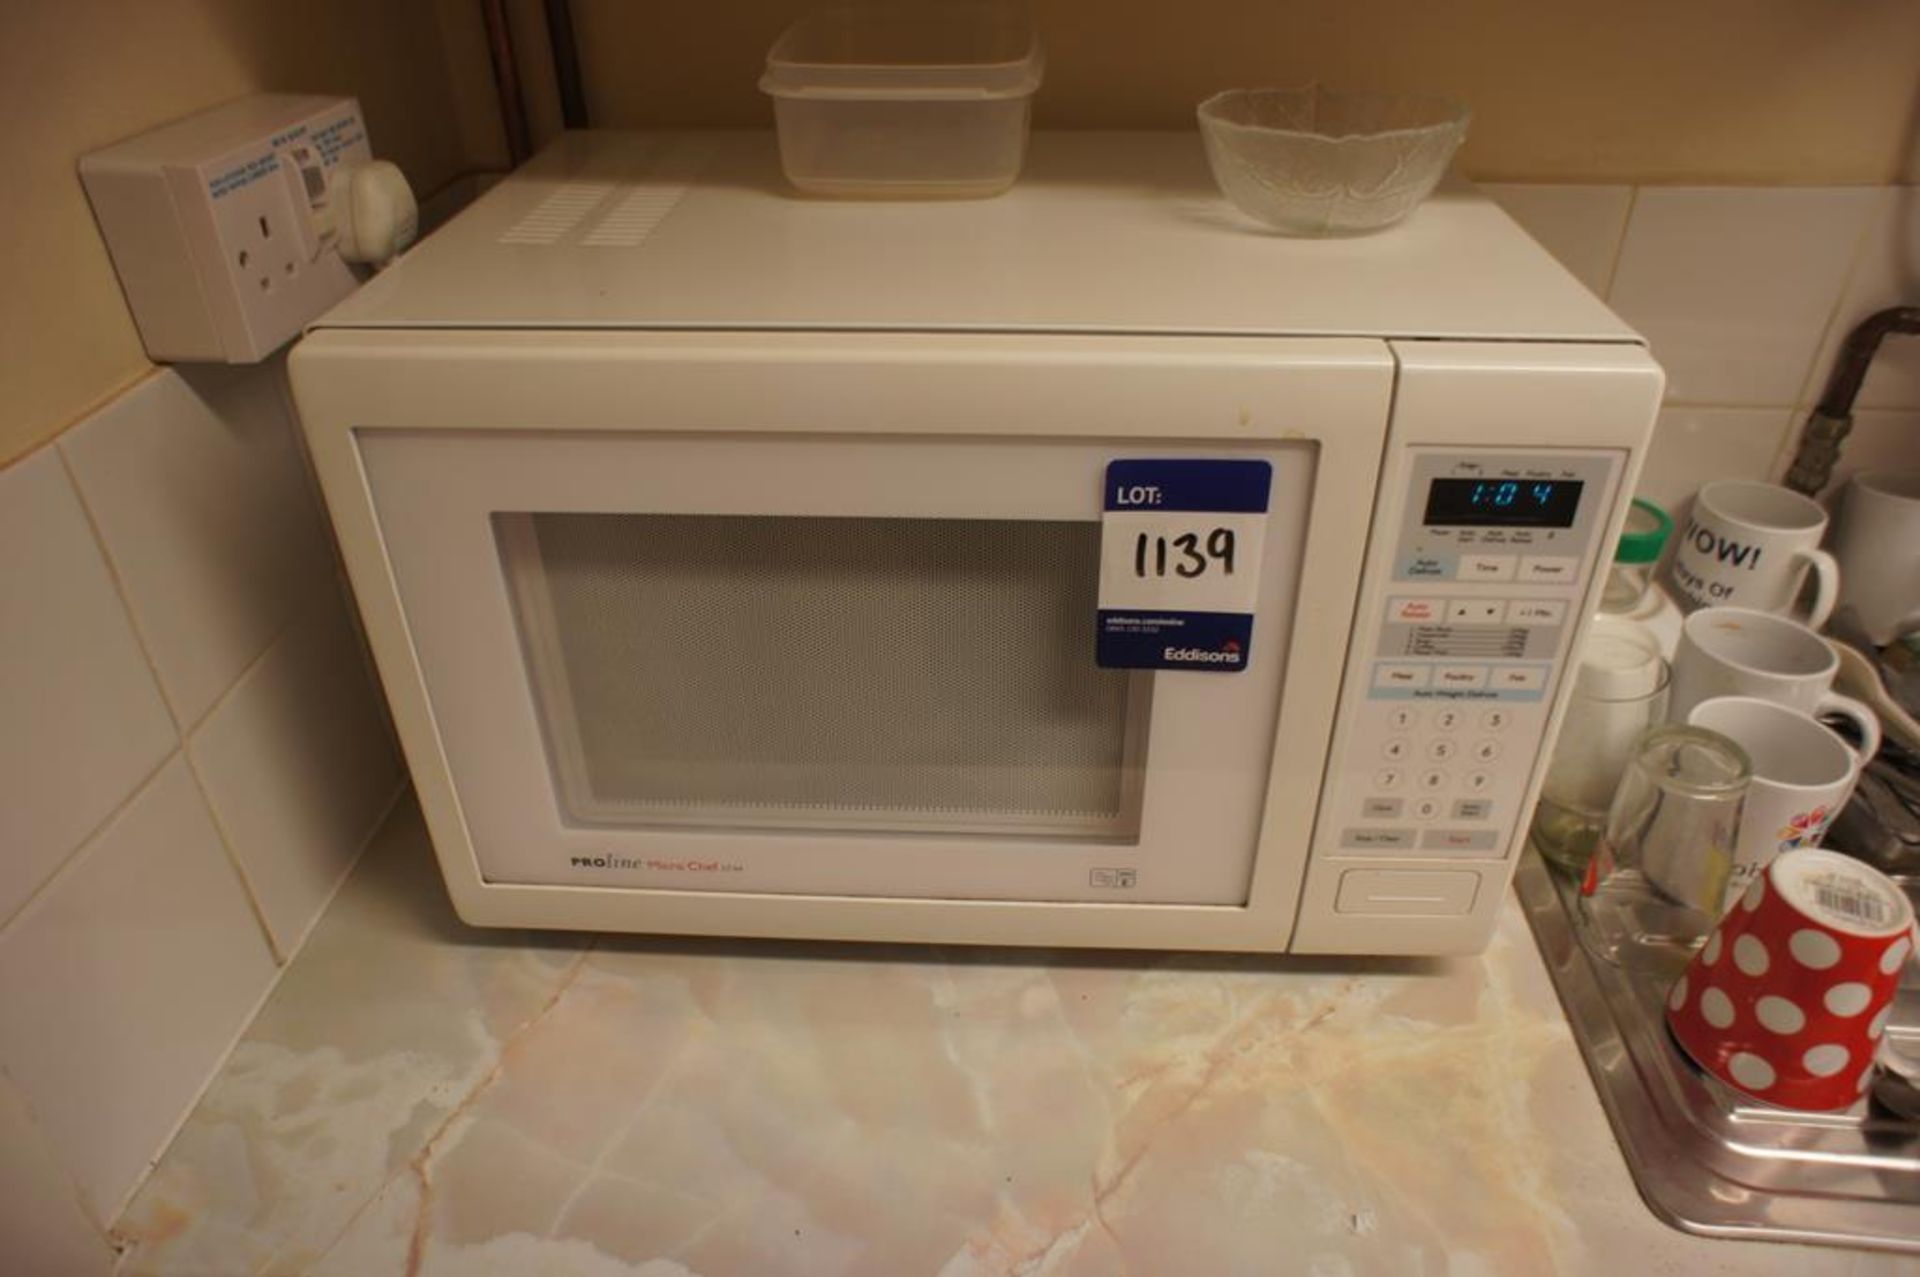 * Proline Microwave Oven Photographs are provided for example purposes only and do not represent the - Image 2 of 3